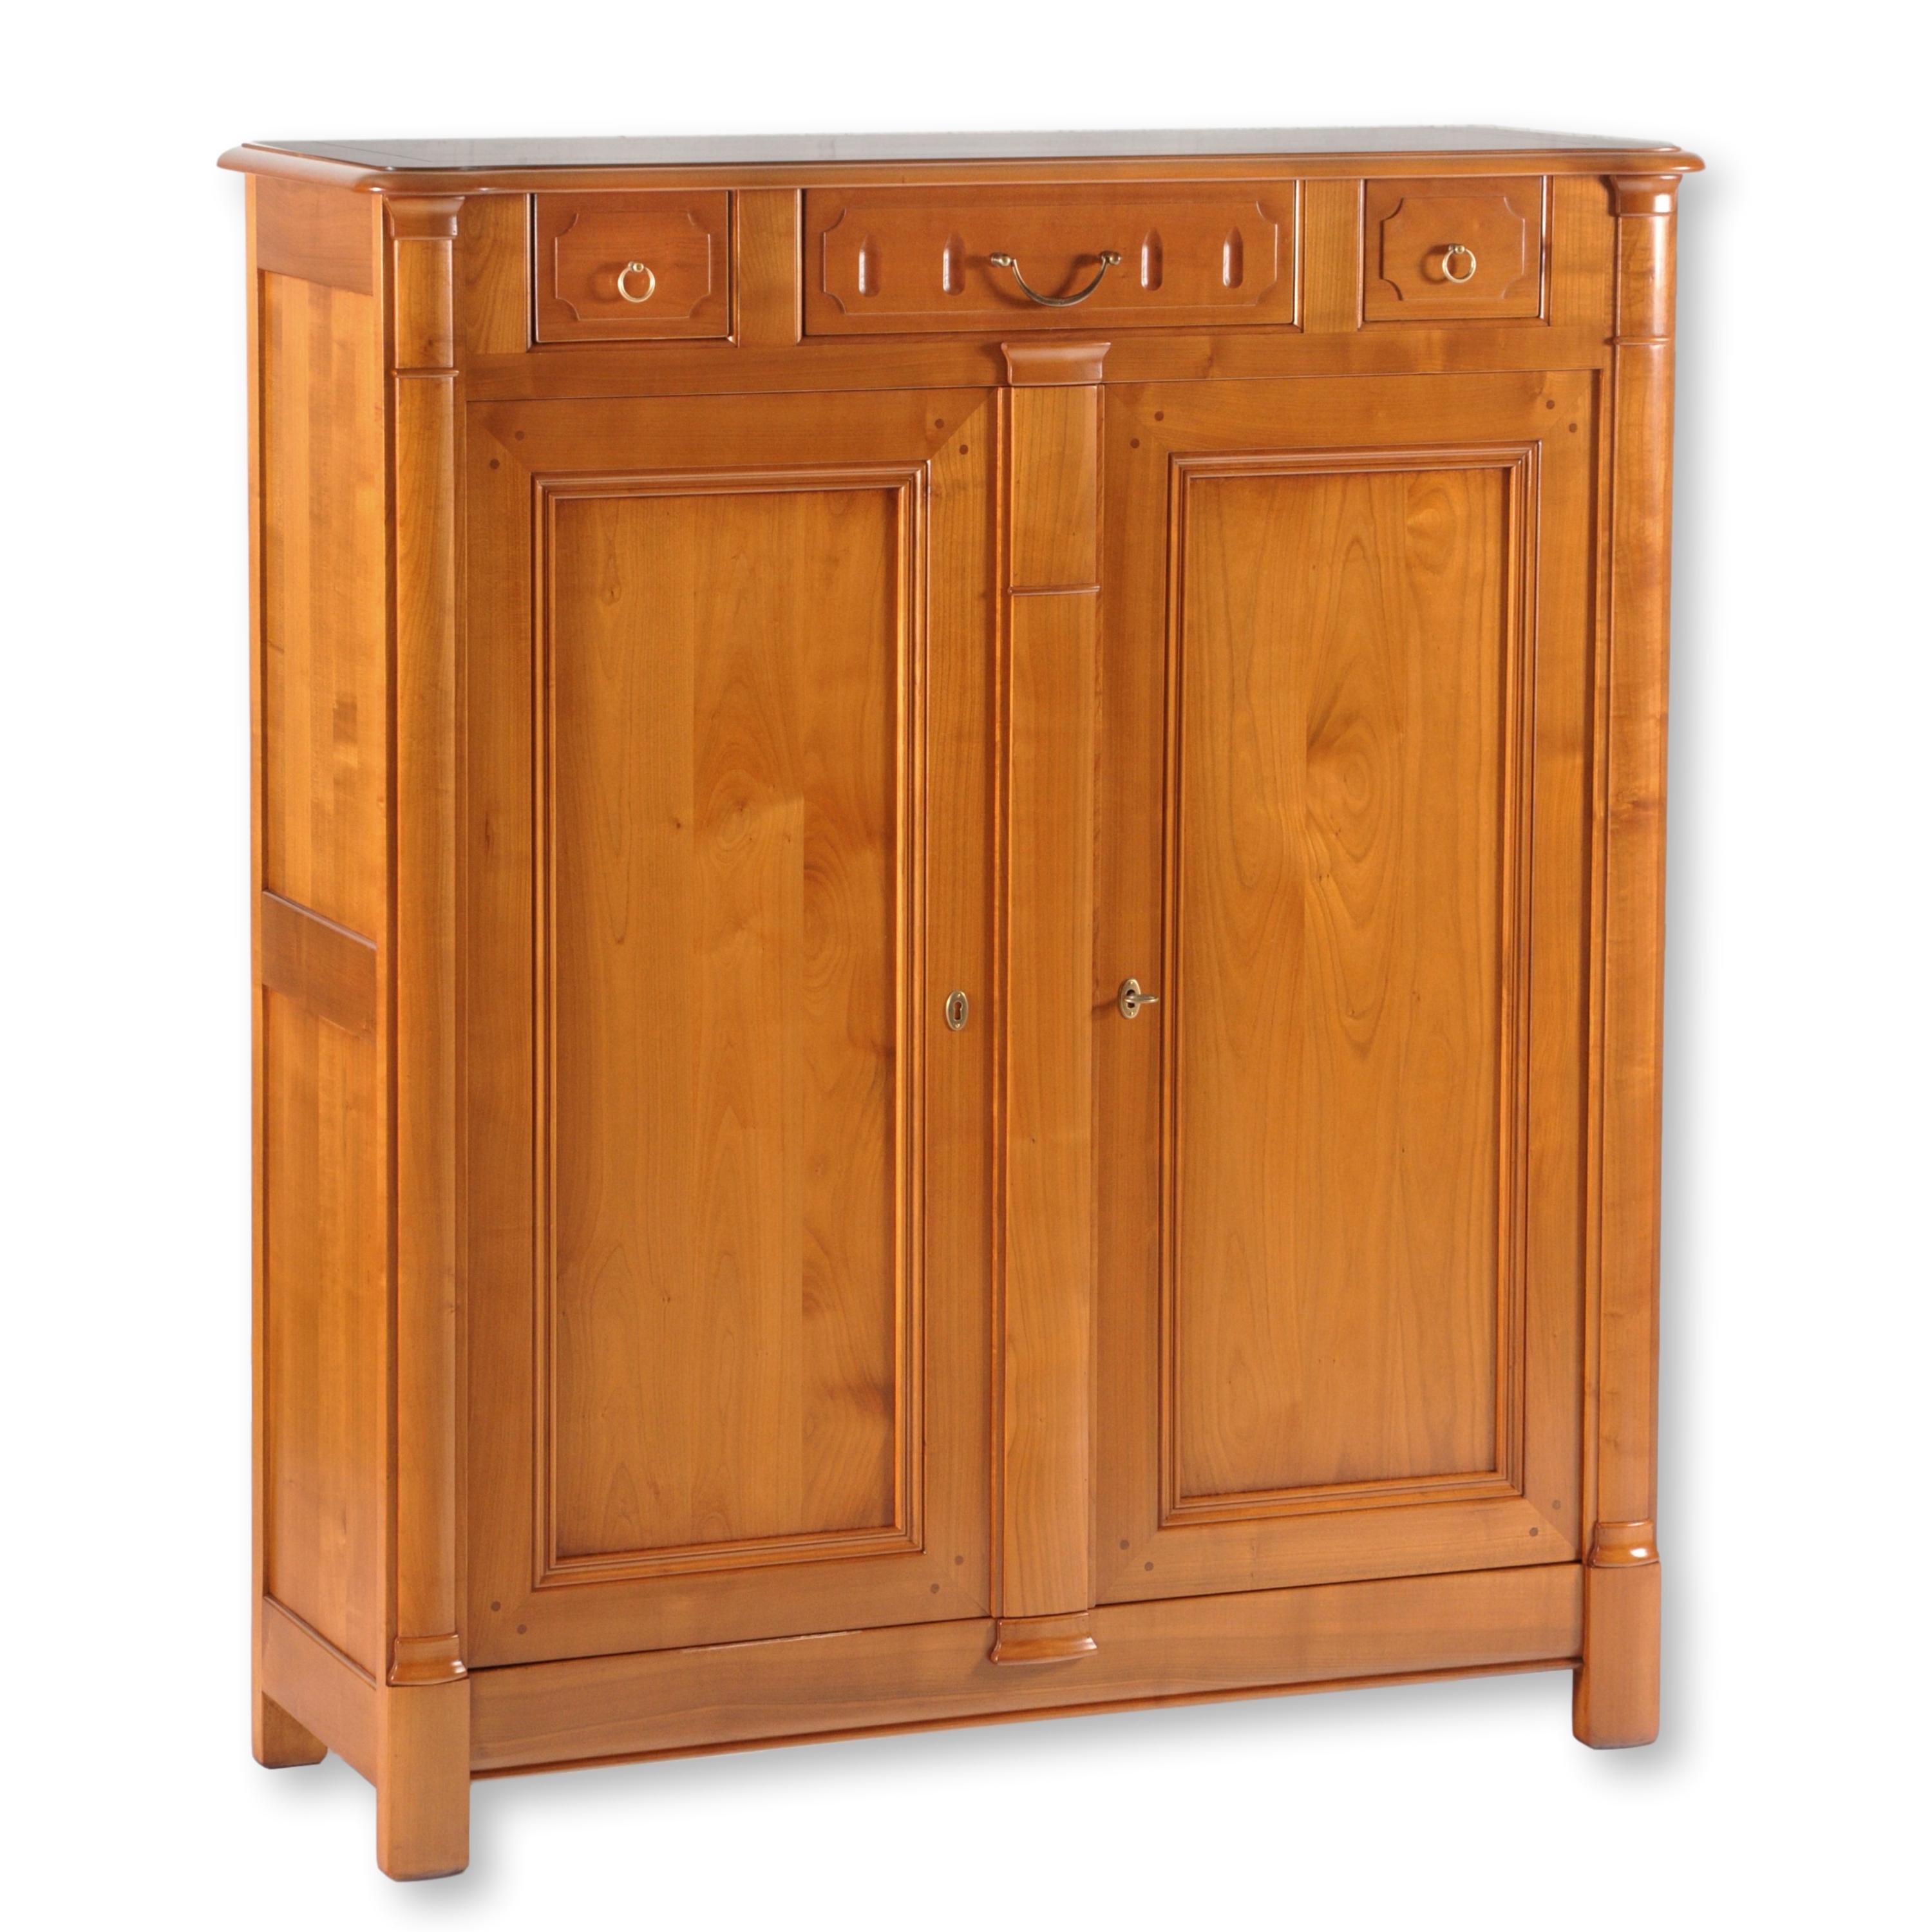 This high buffet's design is in a French Countryside style, also called 